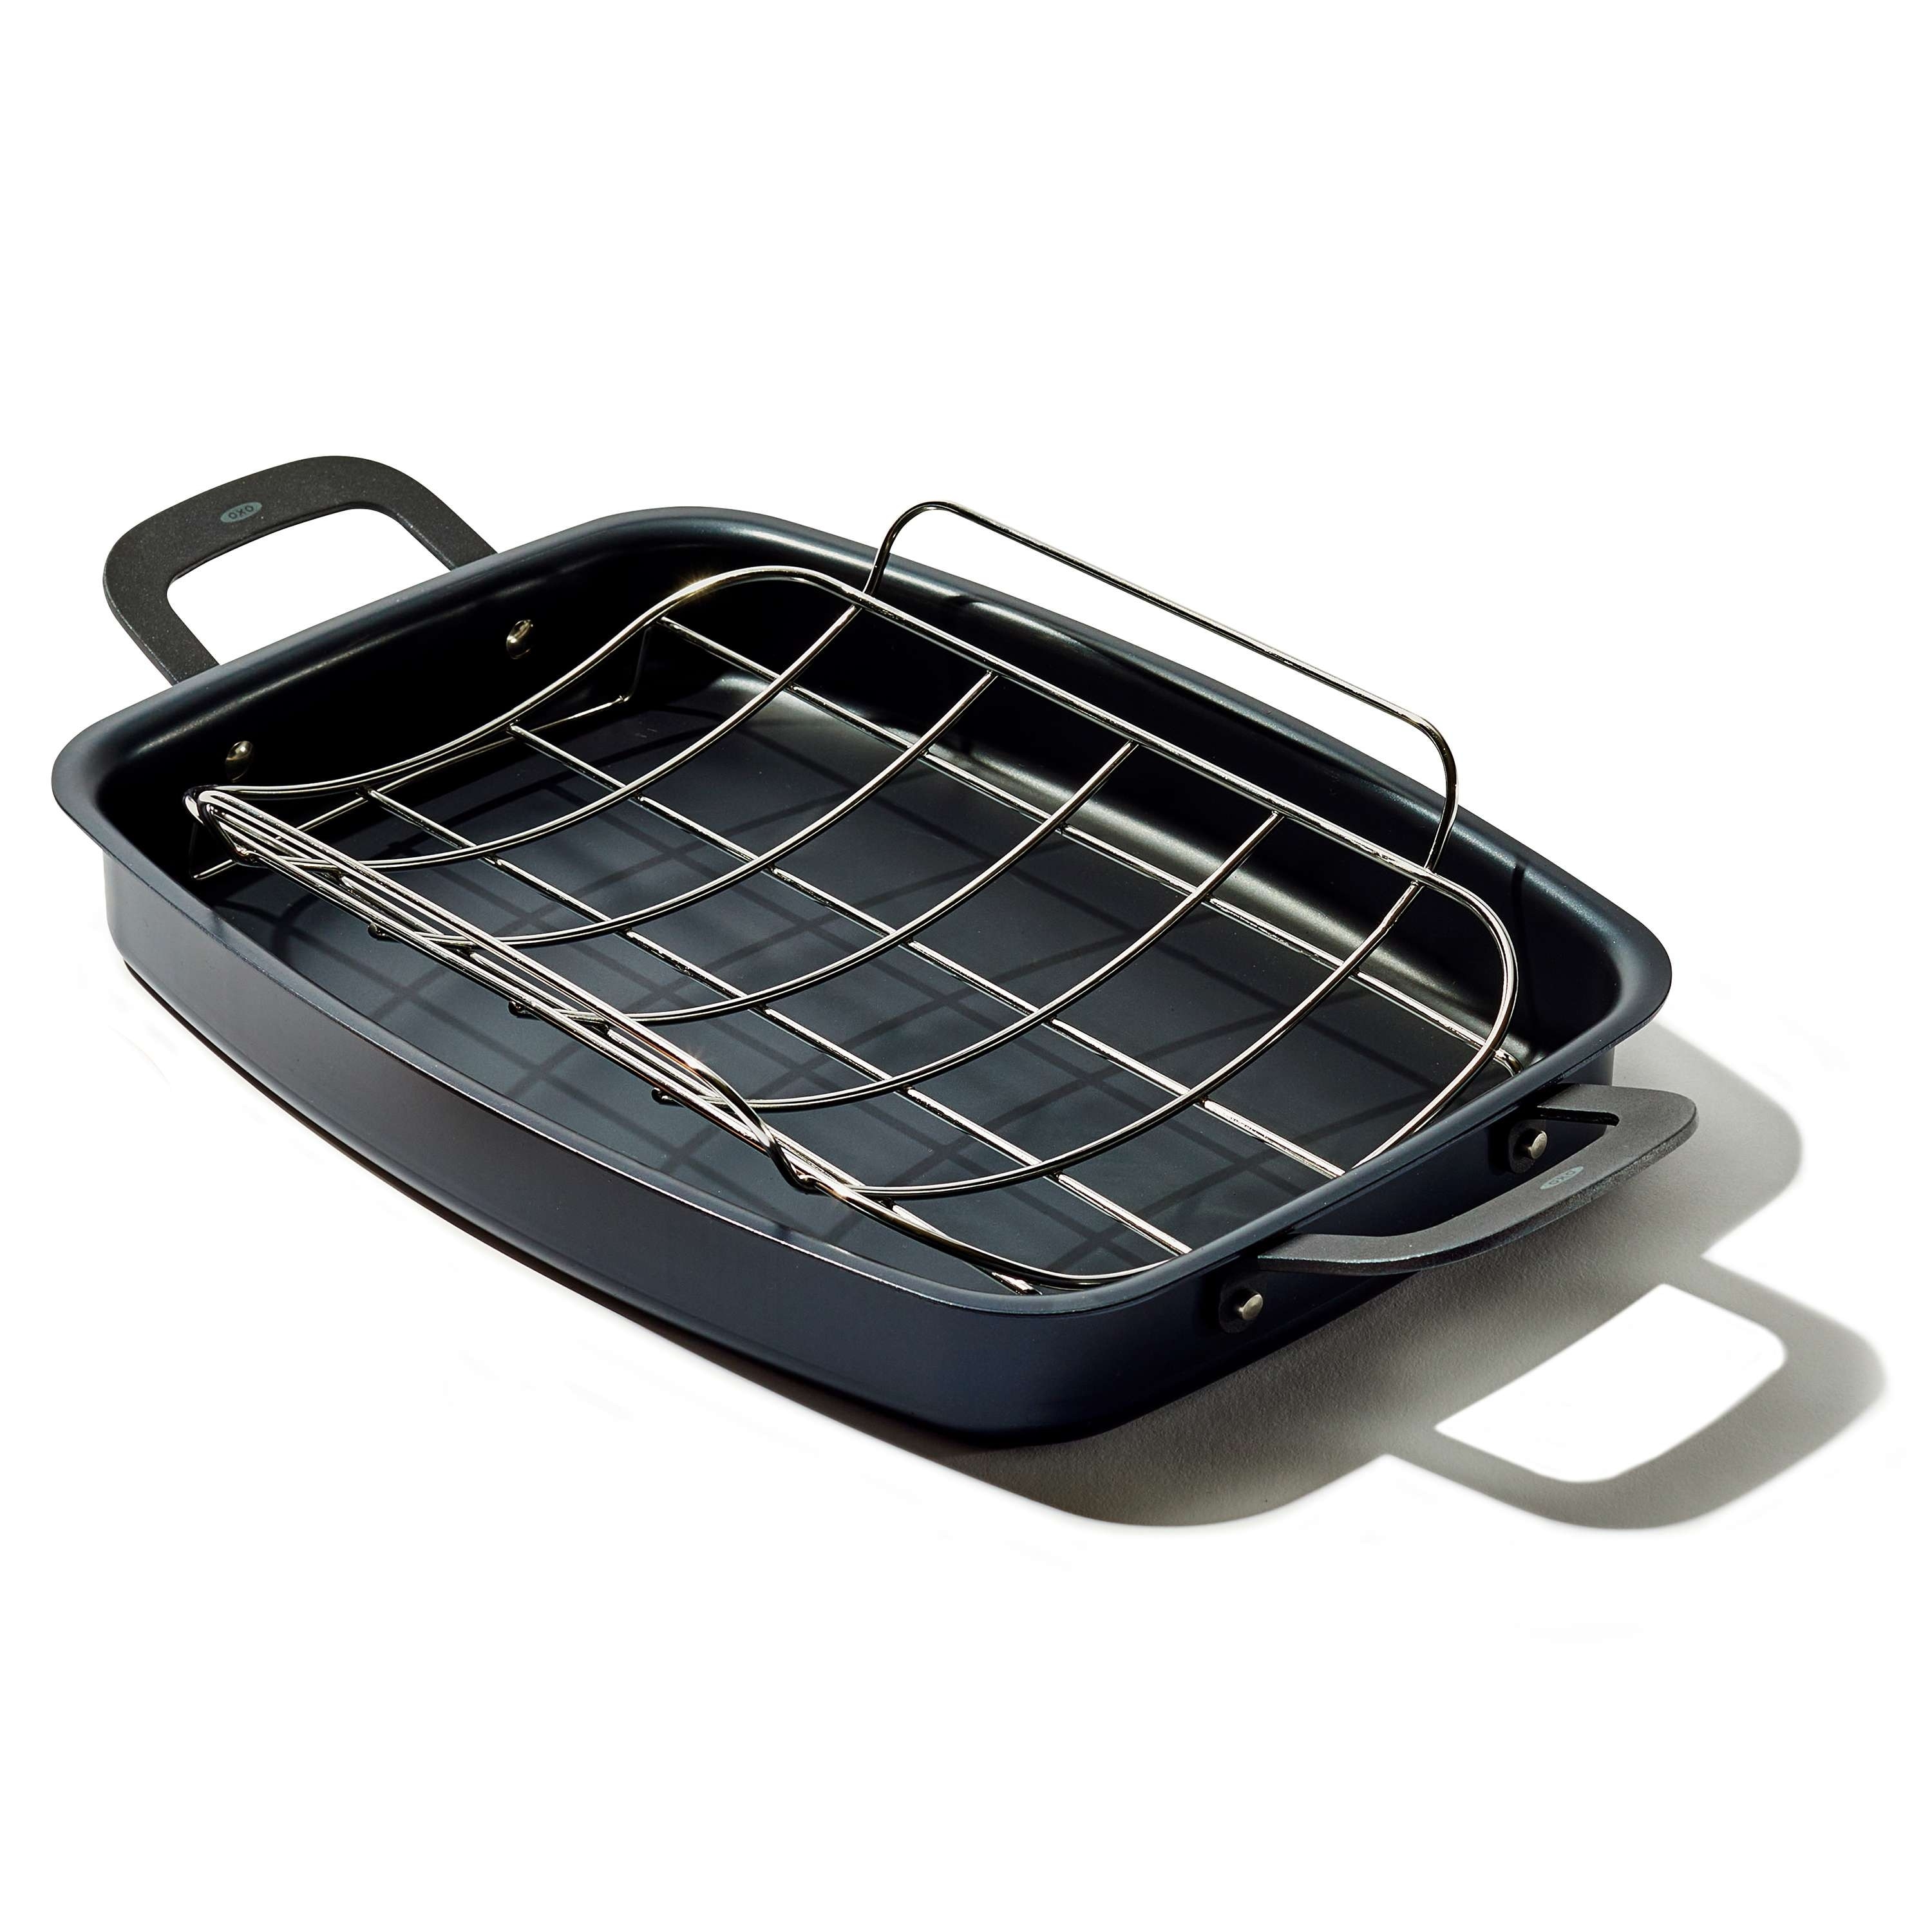 https://ak1.ostkcdn.com/images/products/is/images/direct/59a57ec4469b53ef2ee74fe092585233834192e6/OXO-Black-Steel-Open-Roaster-with-U-rack-15%22x10.5%22x2.25%22.jpg